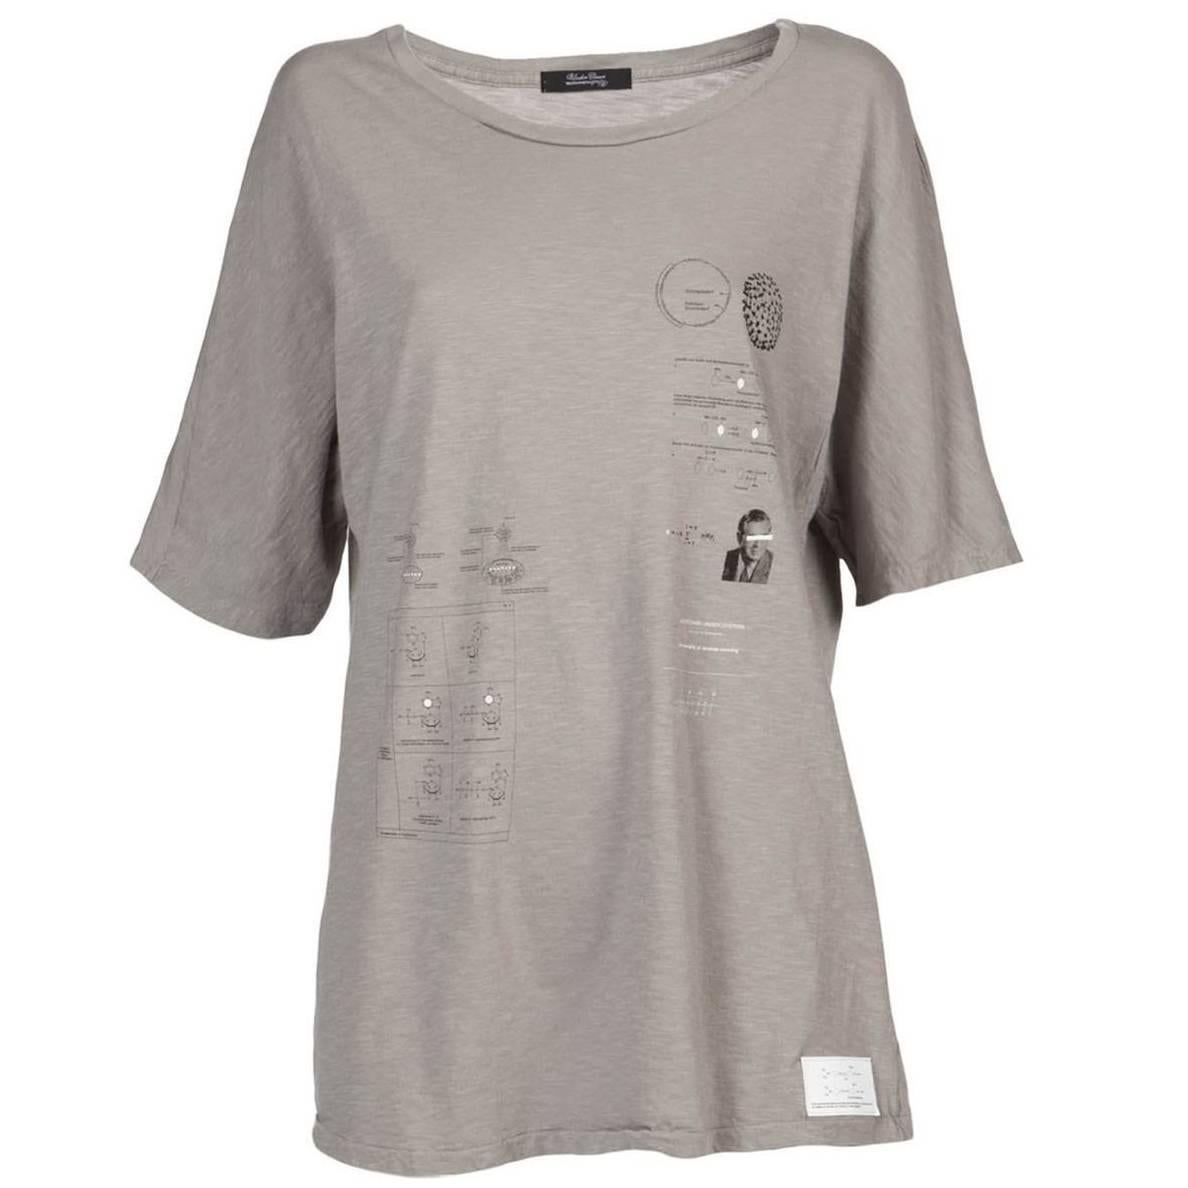 Undercover A/W 2010 Oversize Fit Graphic Print T-Shirt